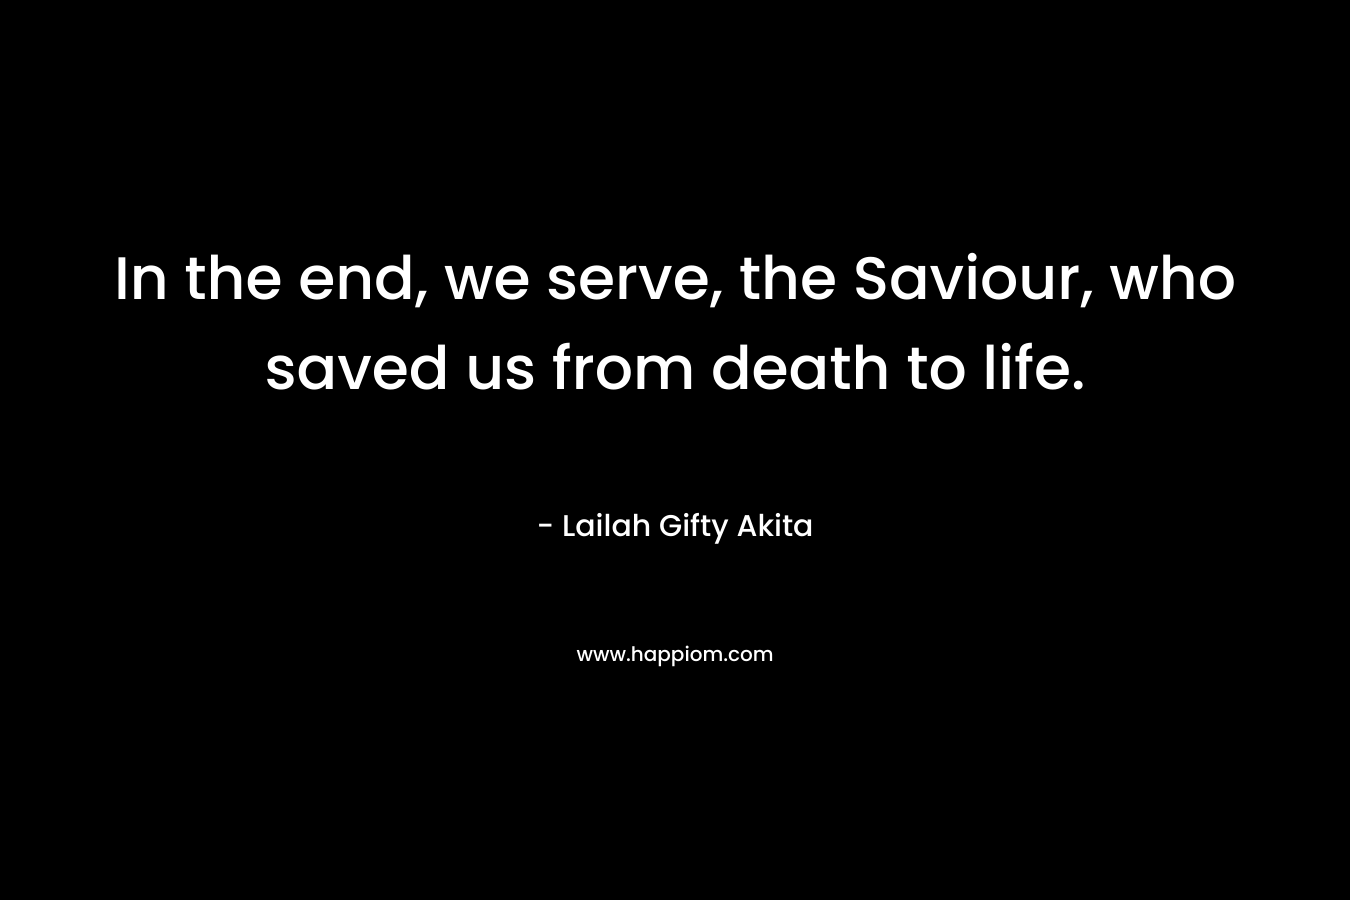 In the end, we serve, the Saviour, who saved us from death to life.